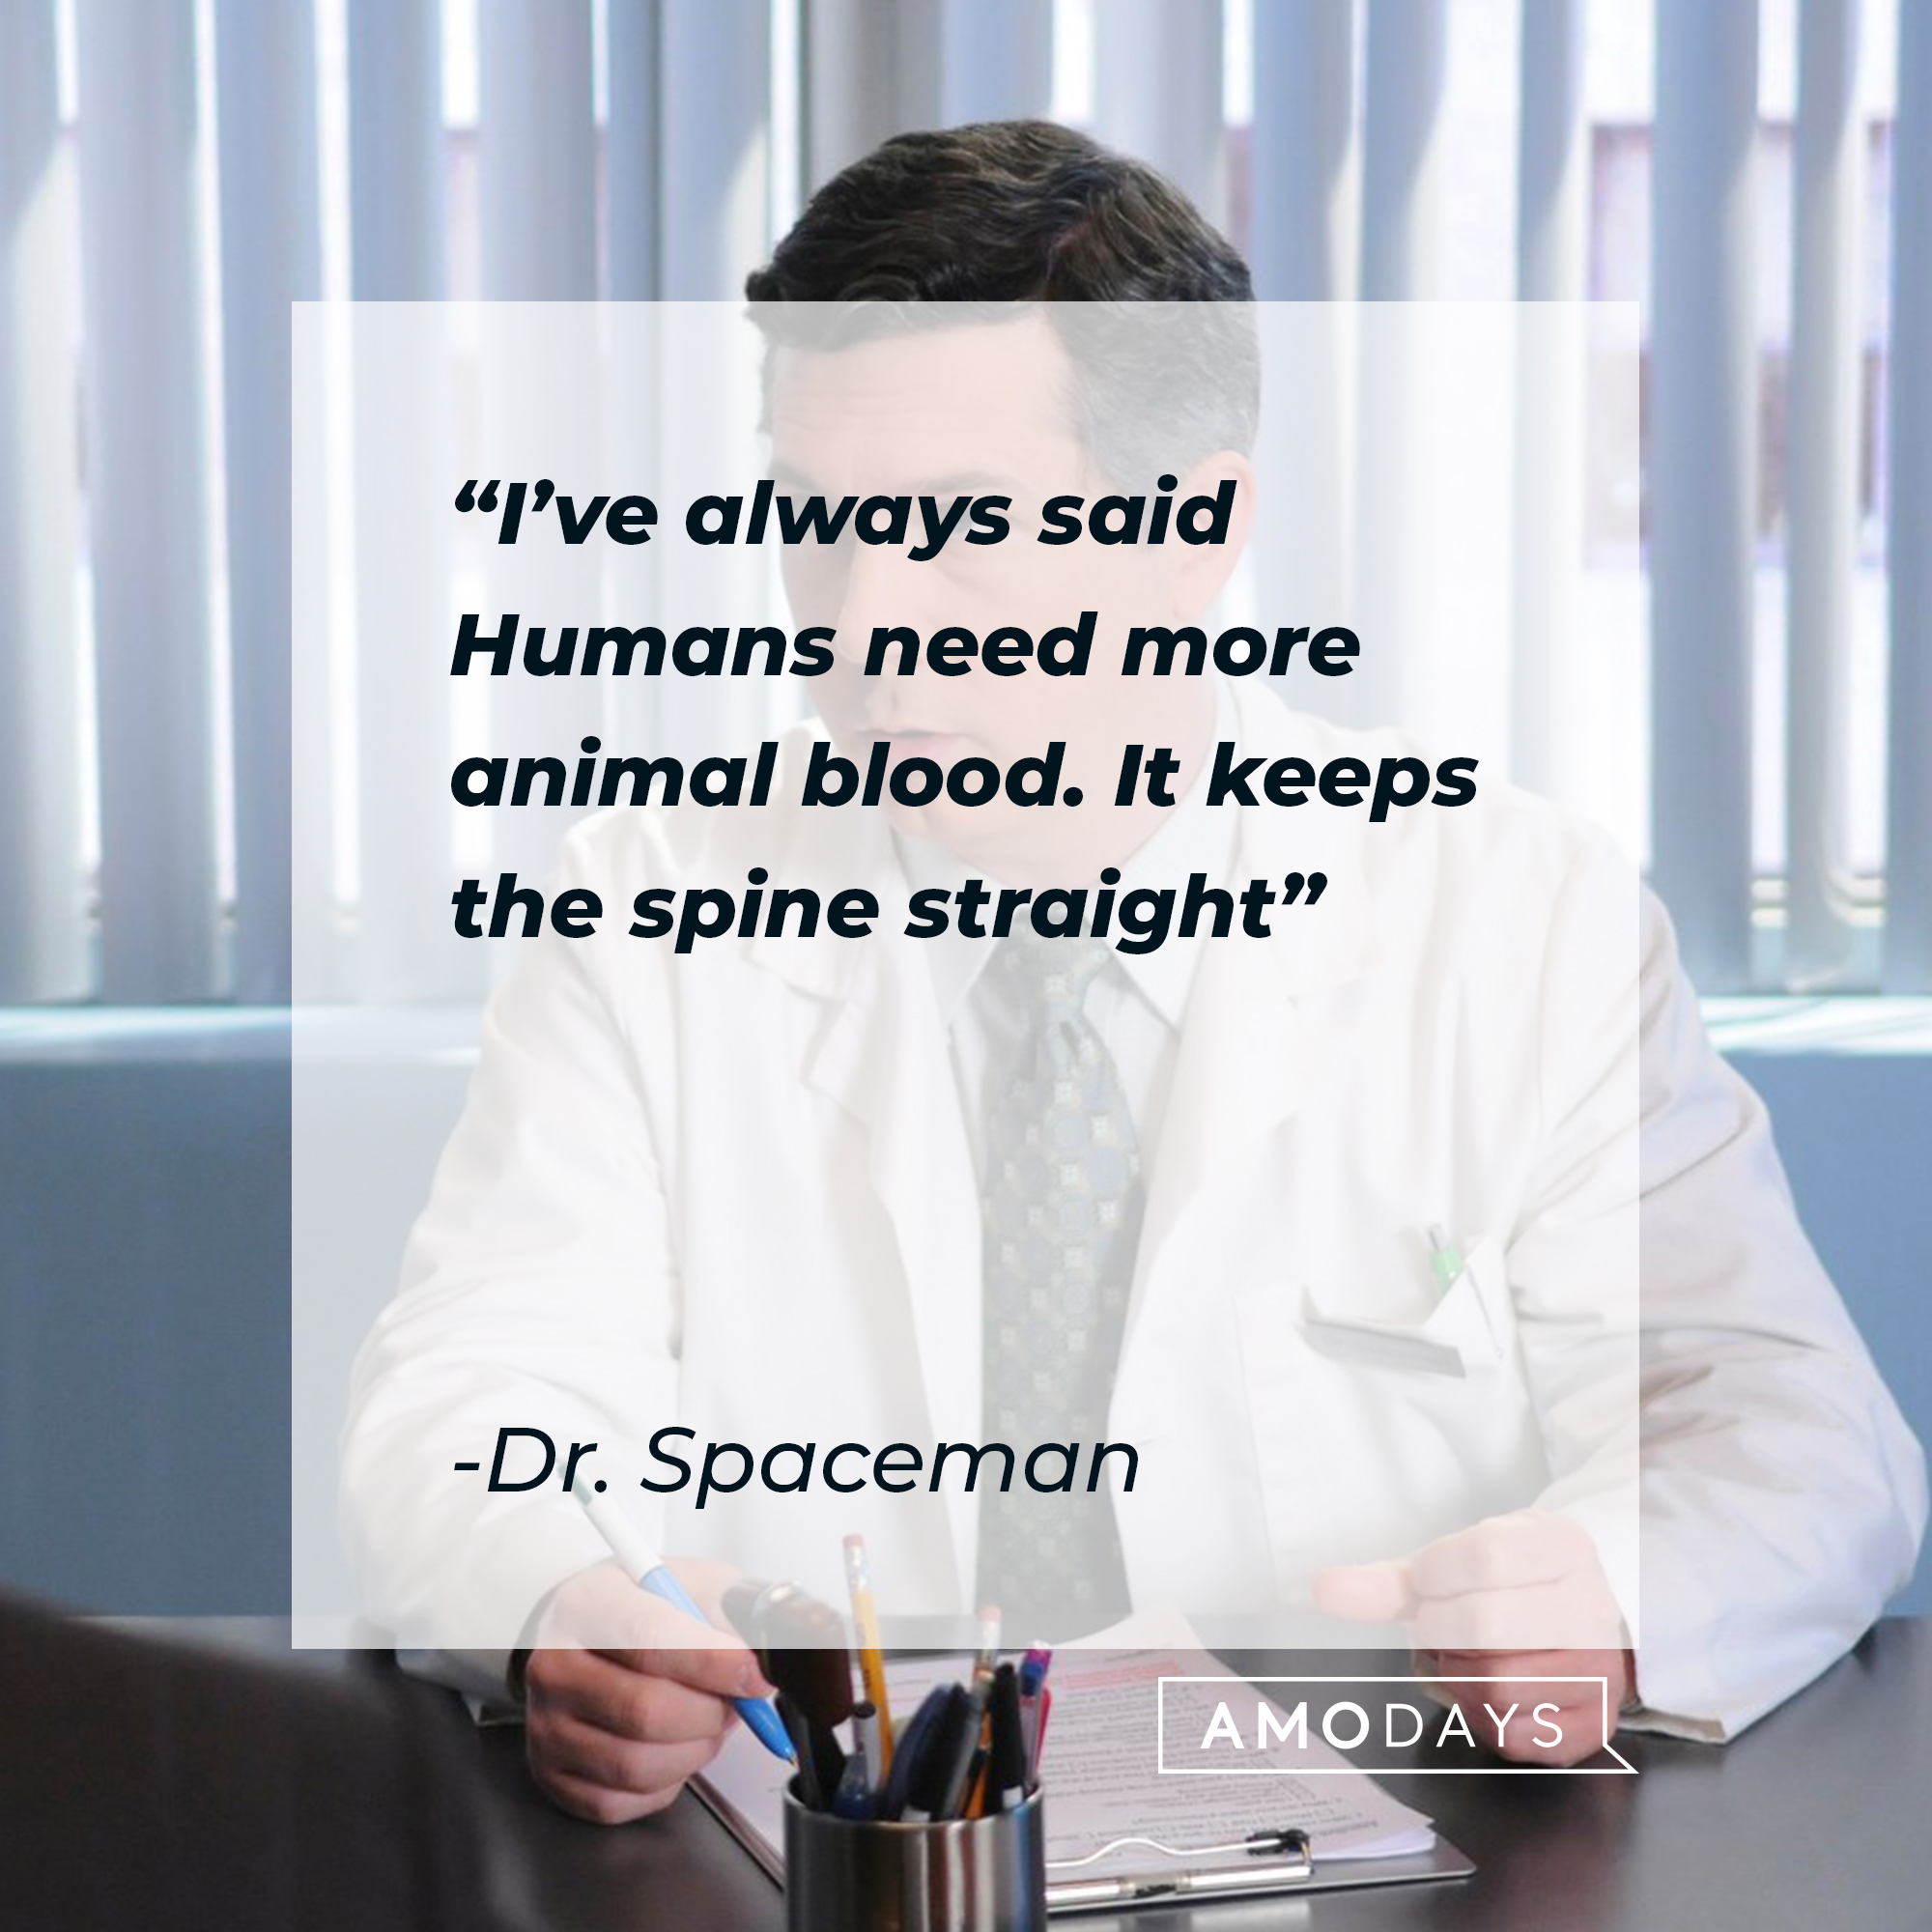 Dr. Spaceman's quote: “I’ve always said Humans need more animal blood. It keeps the spine straight” | Source: facebook.com/30RockTV